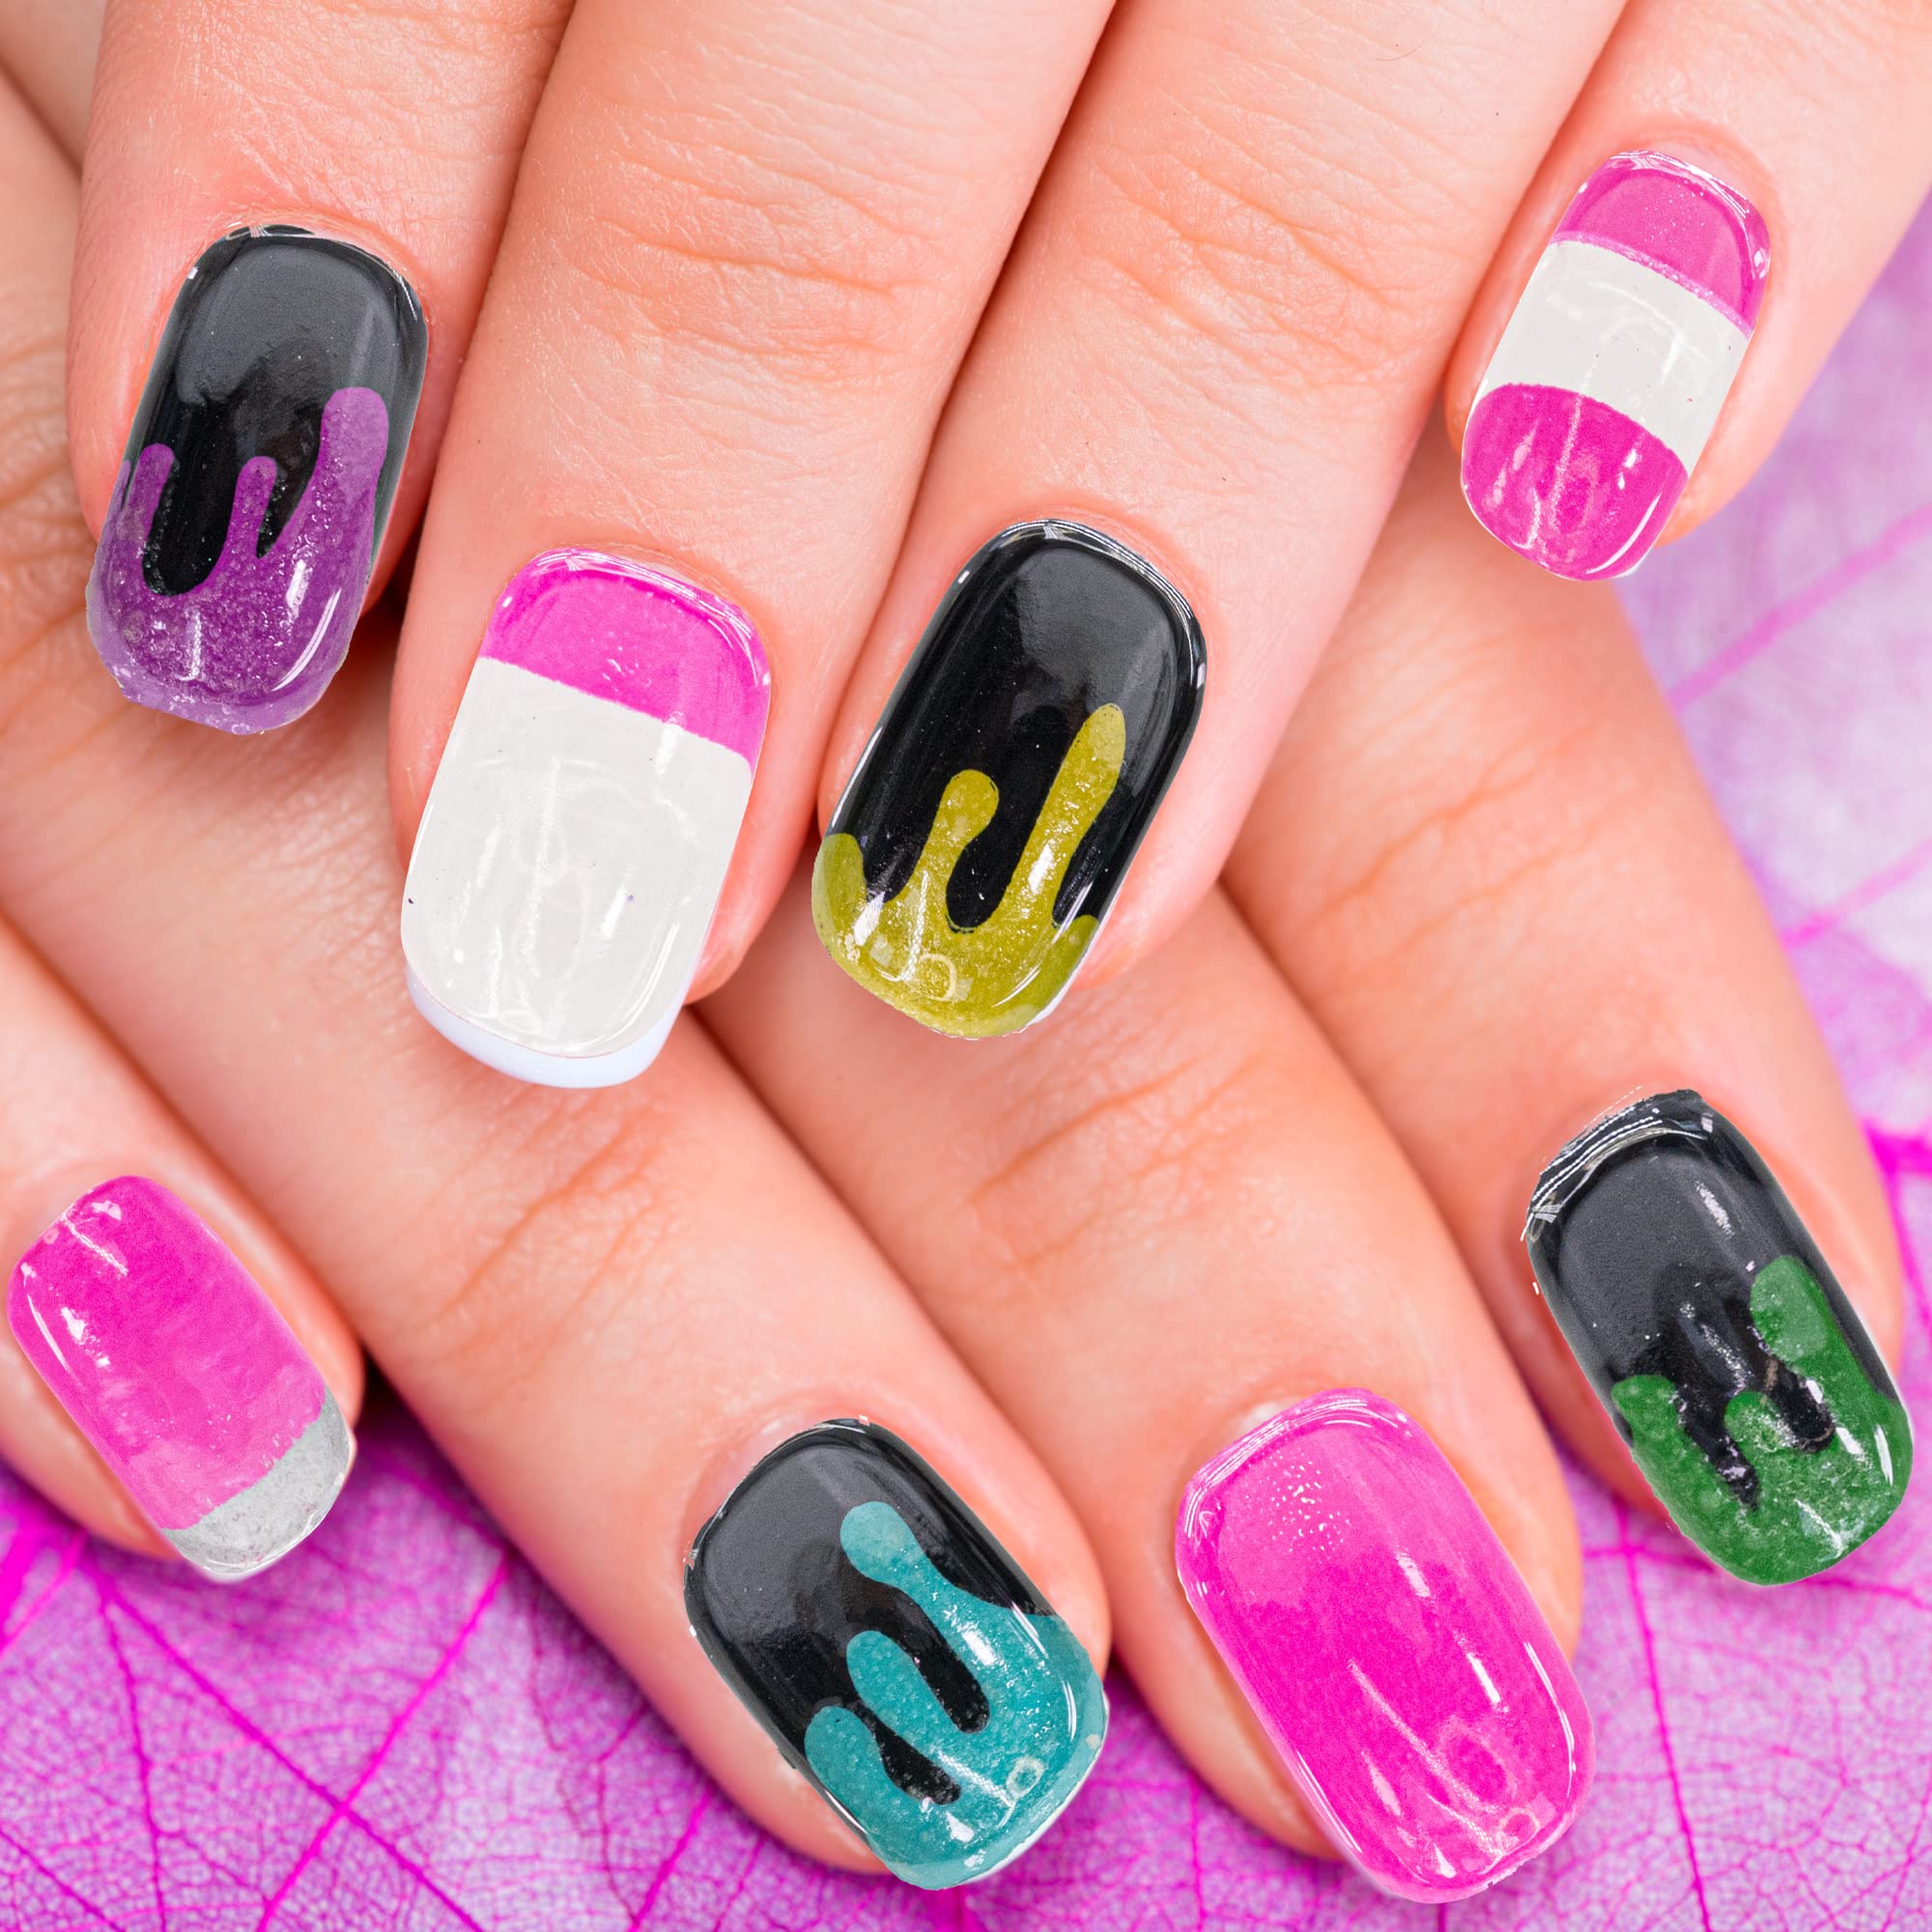 3D Gummy Nails Are The Viral Whimsical Manicure Trend Bringing The Fun This  Summer